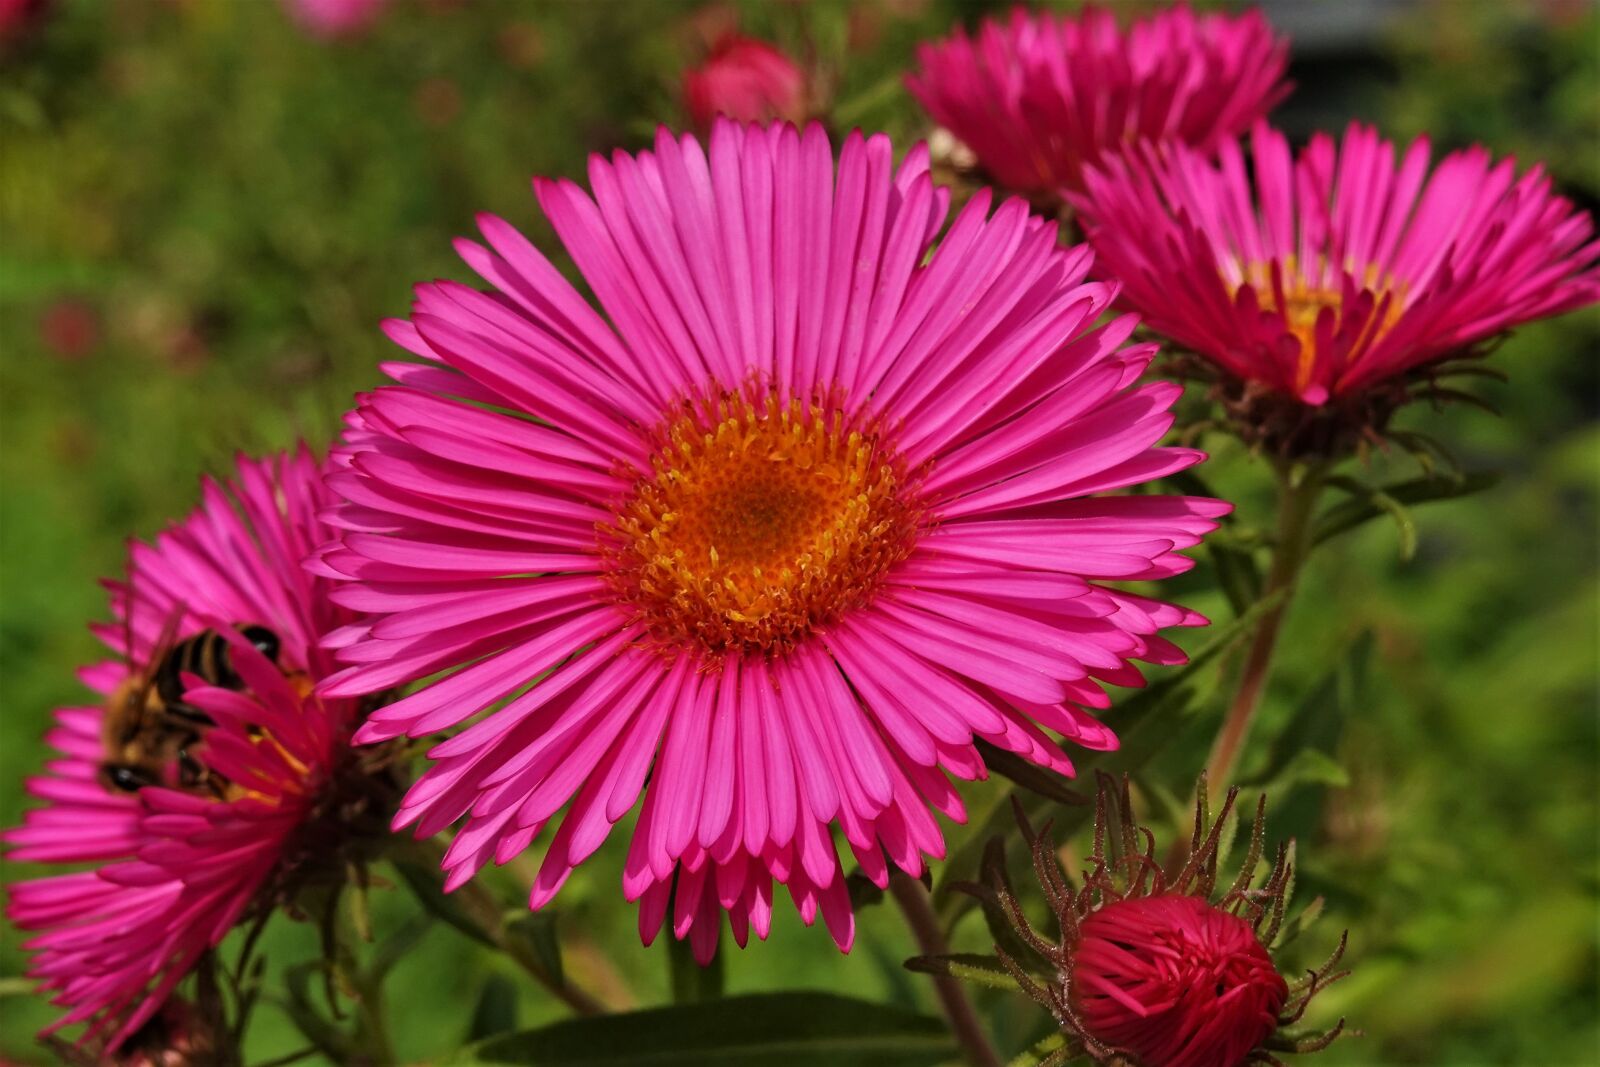 Sony DSC-RX100M7 sample photo. Aster, flowers, petals photography